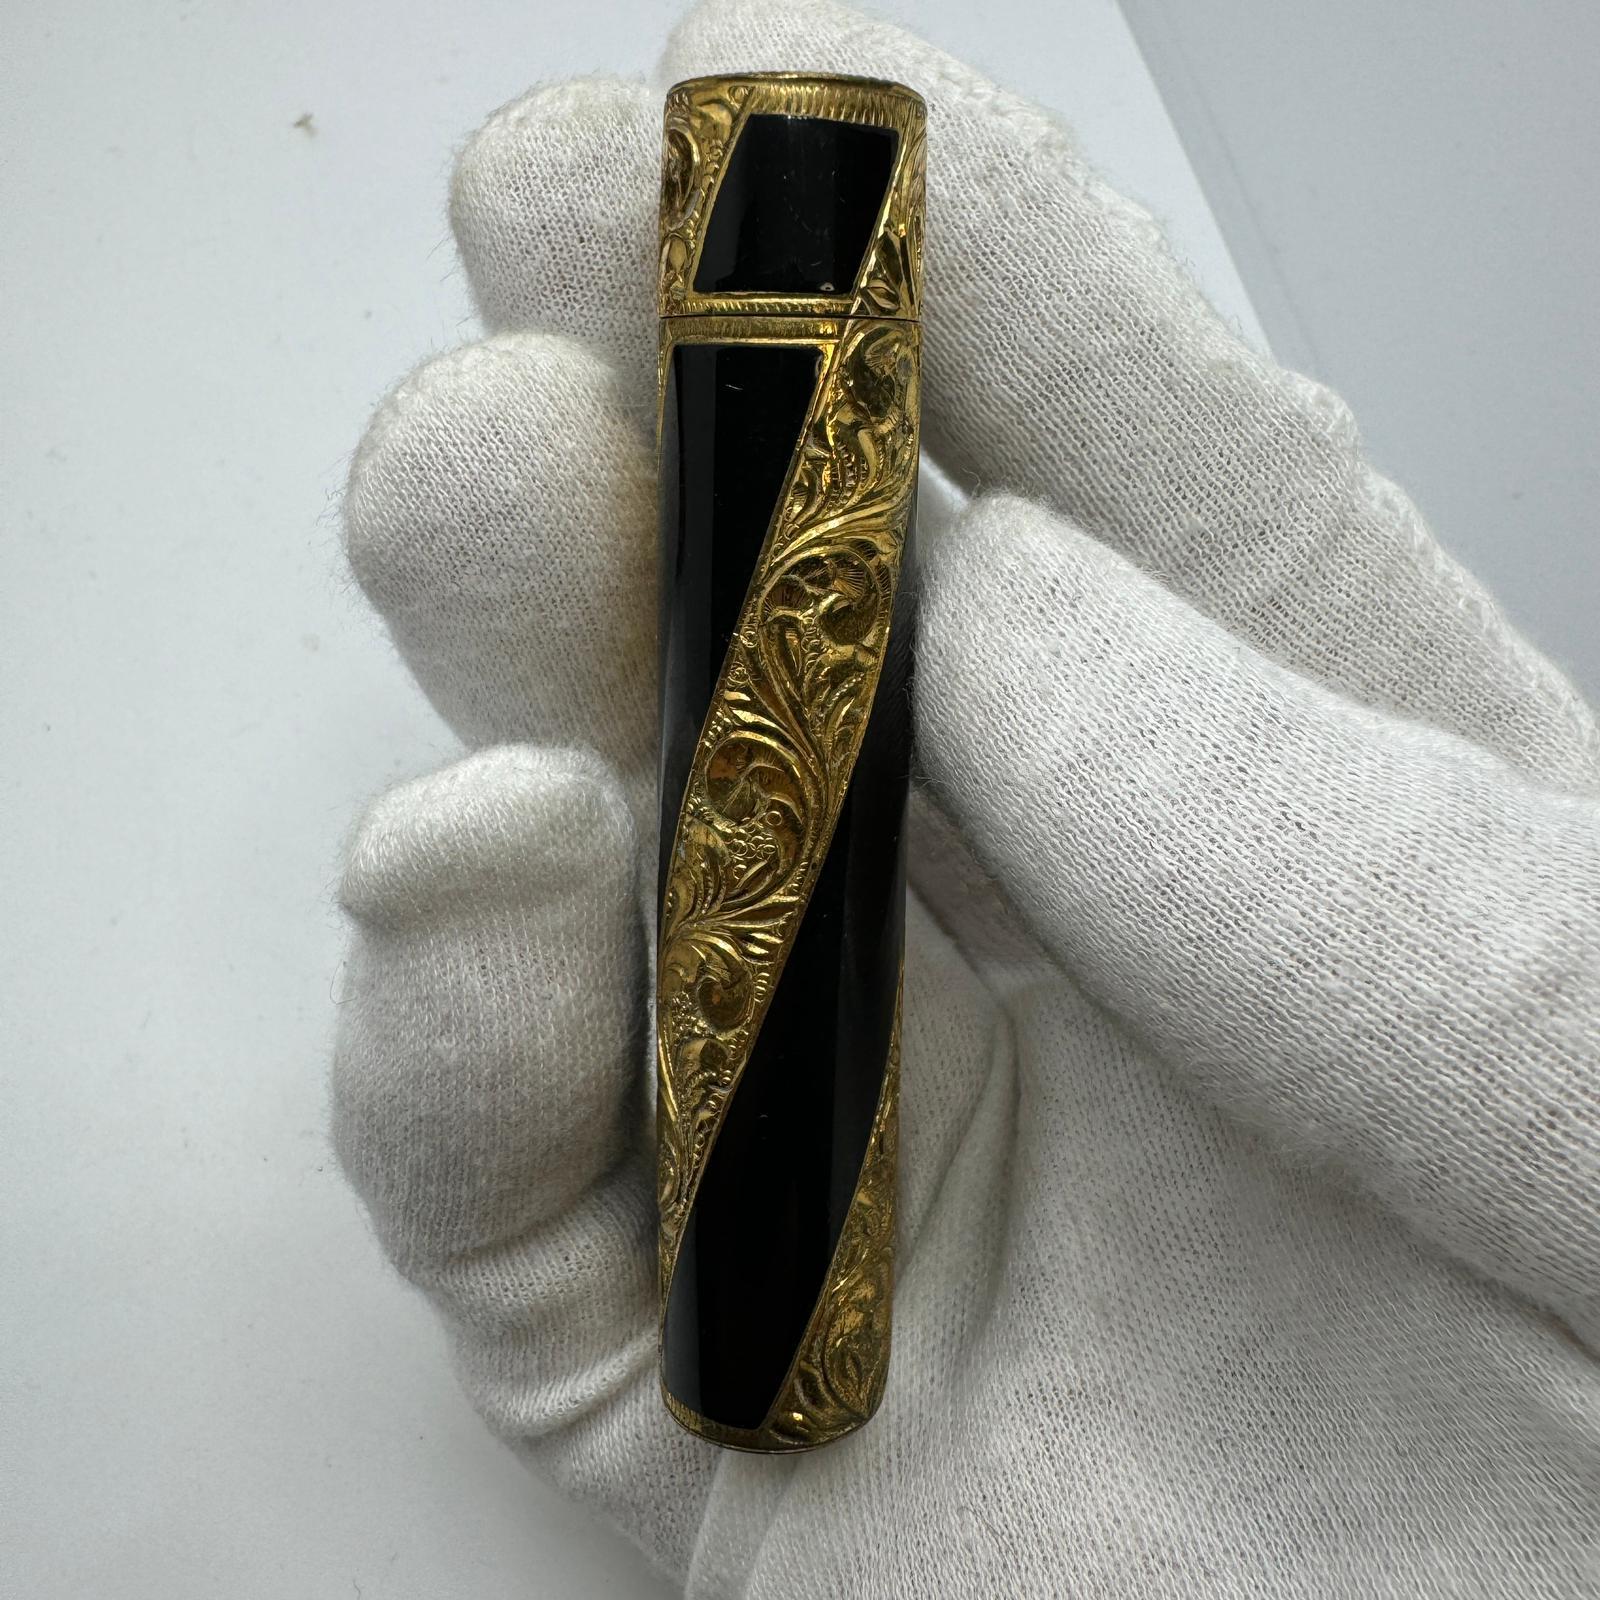 Rare Vintage Cartier circa 1980 18k Gold and Lacquer “Royking” Lighter For Sale 4